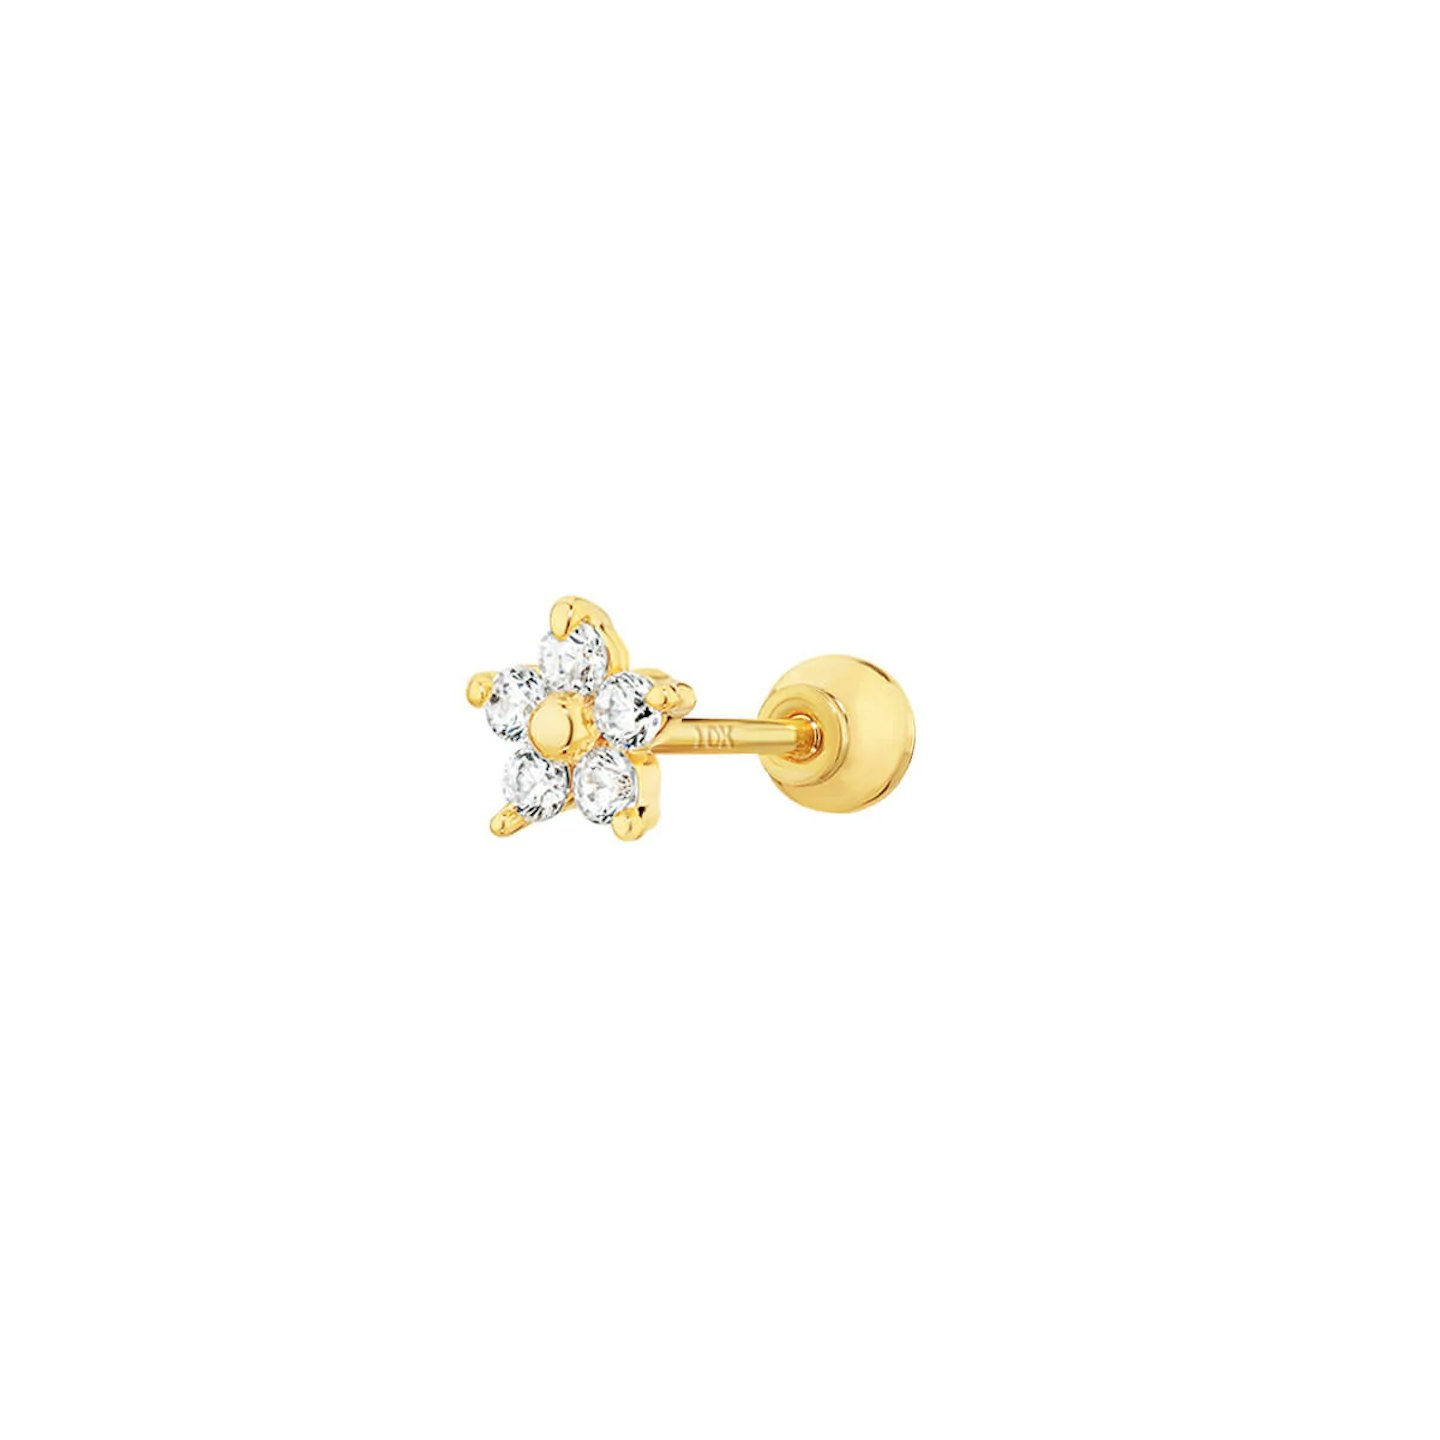 With Bling 9K Teeny Flower Barbell